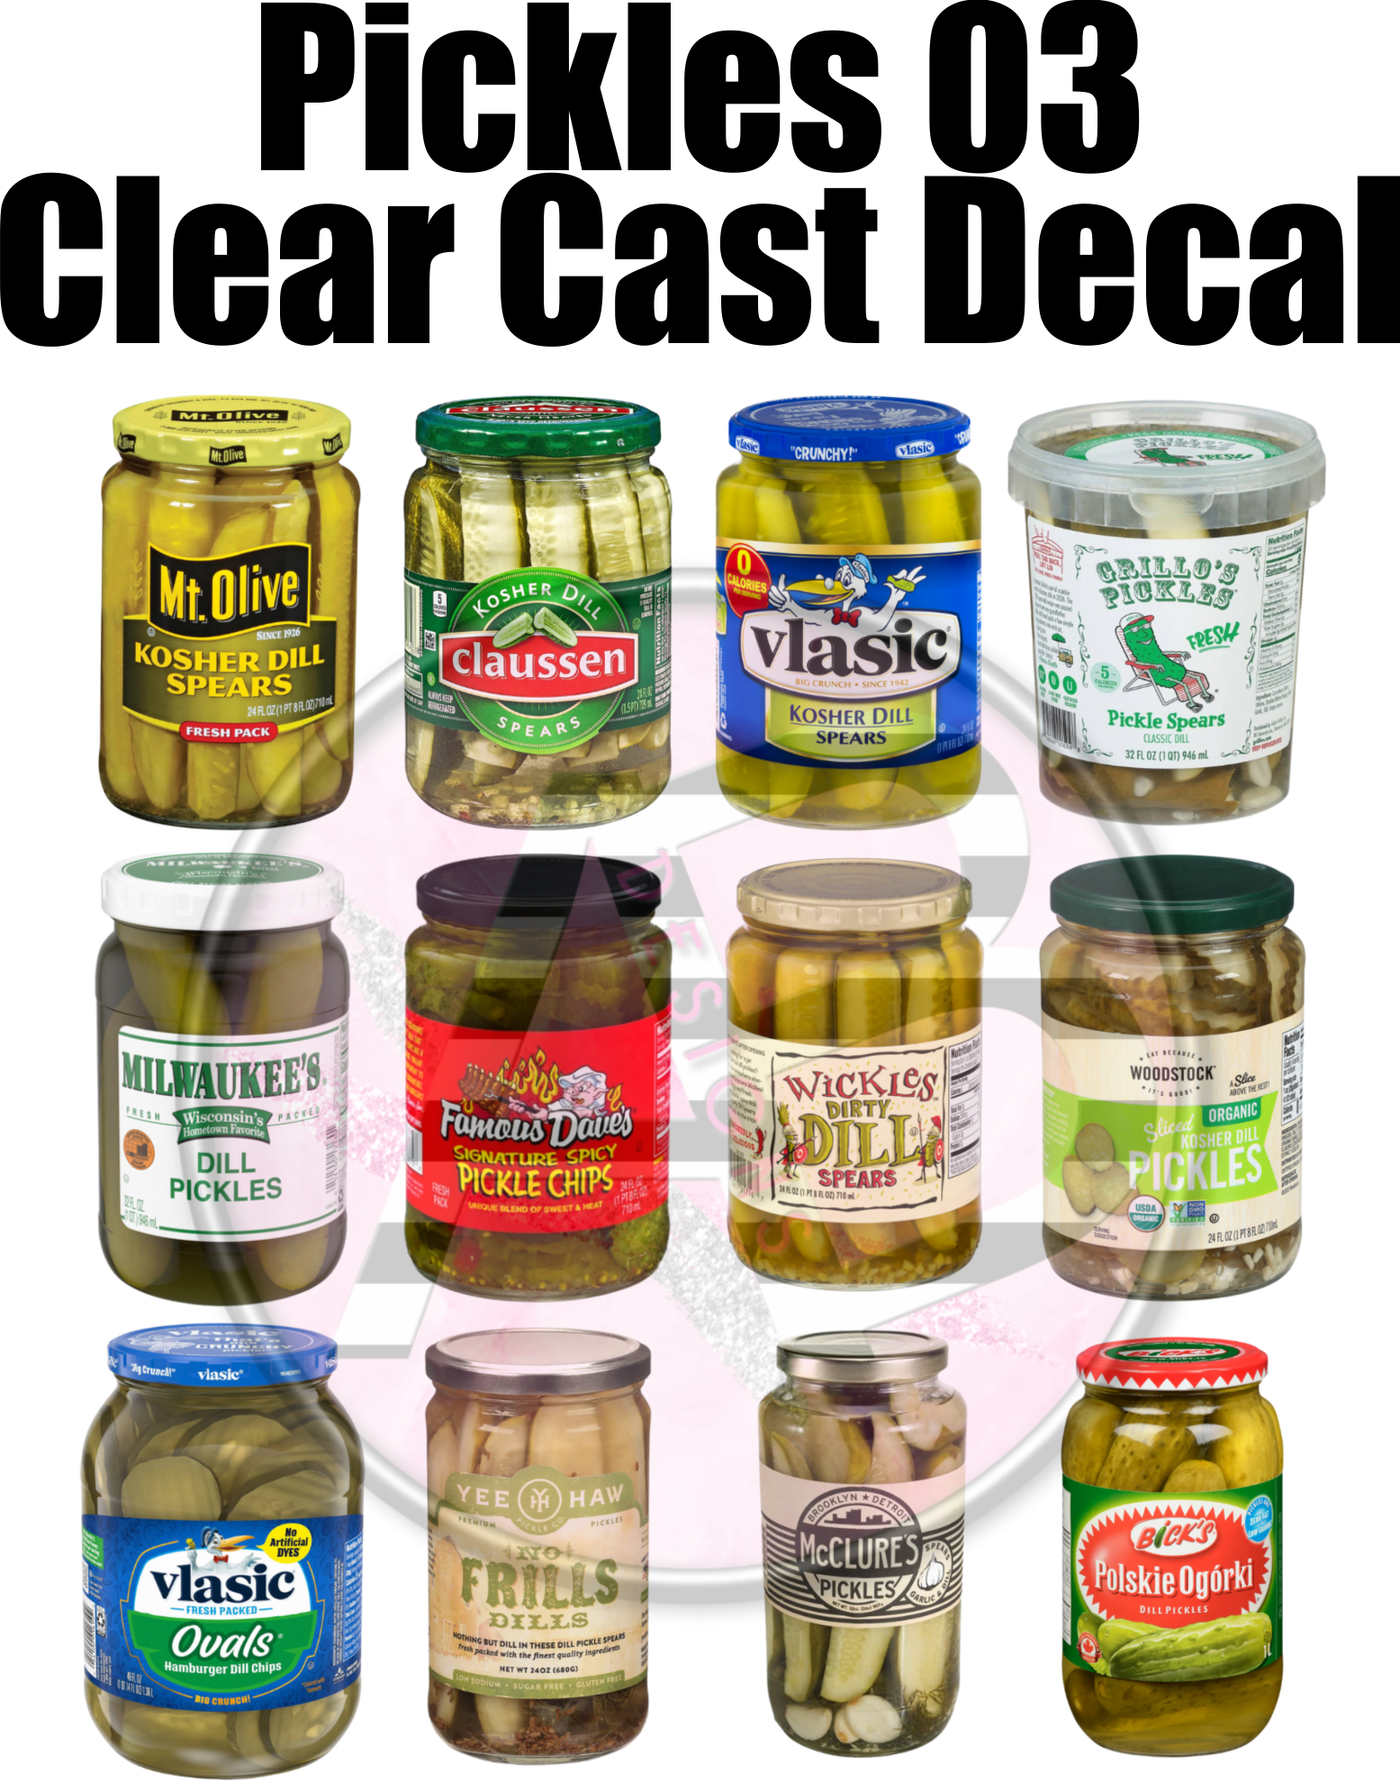 Pickles 03 - Clear Cast Decal-377